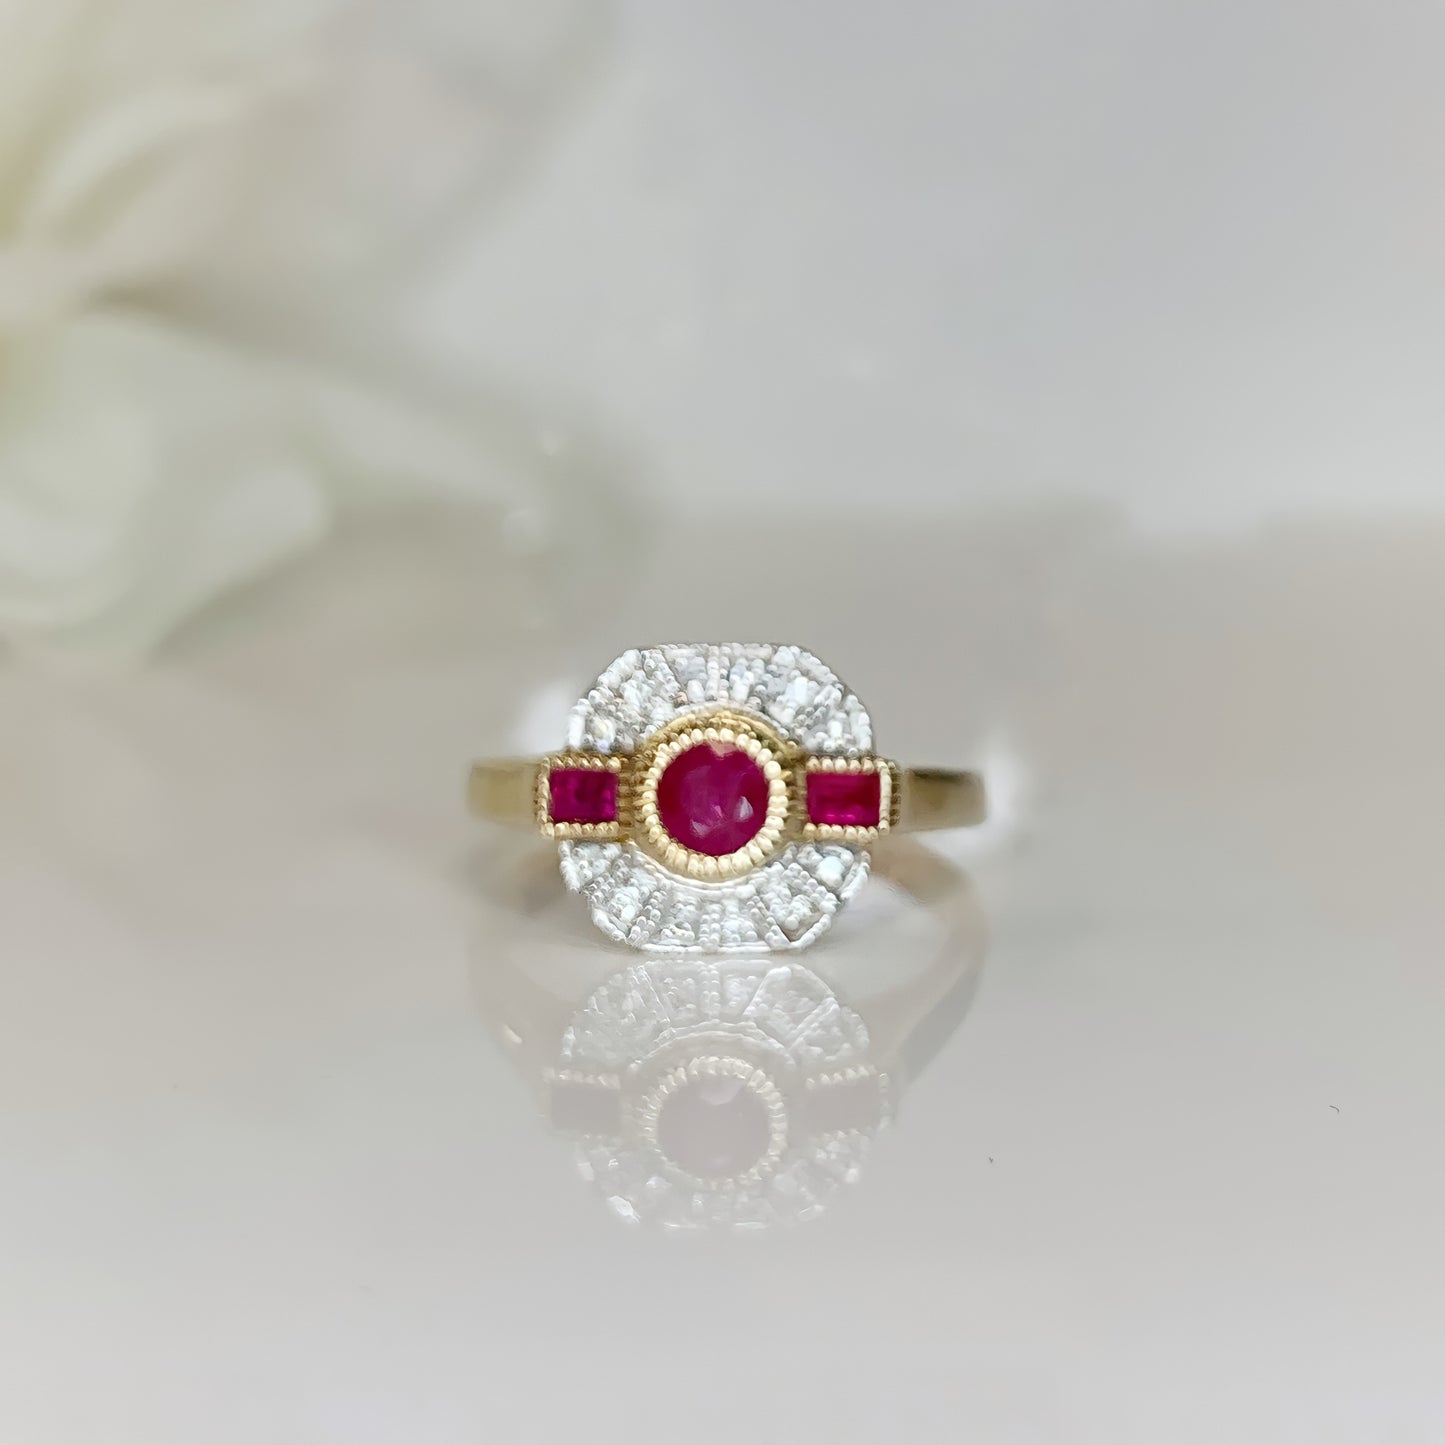 9ct Yellow Gold Art Deco Reproduction Ruby and Diamond Ring – Size N